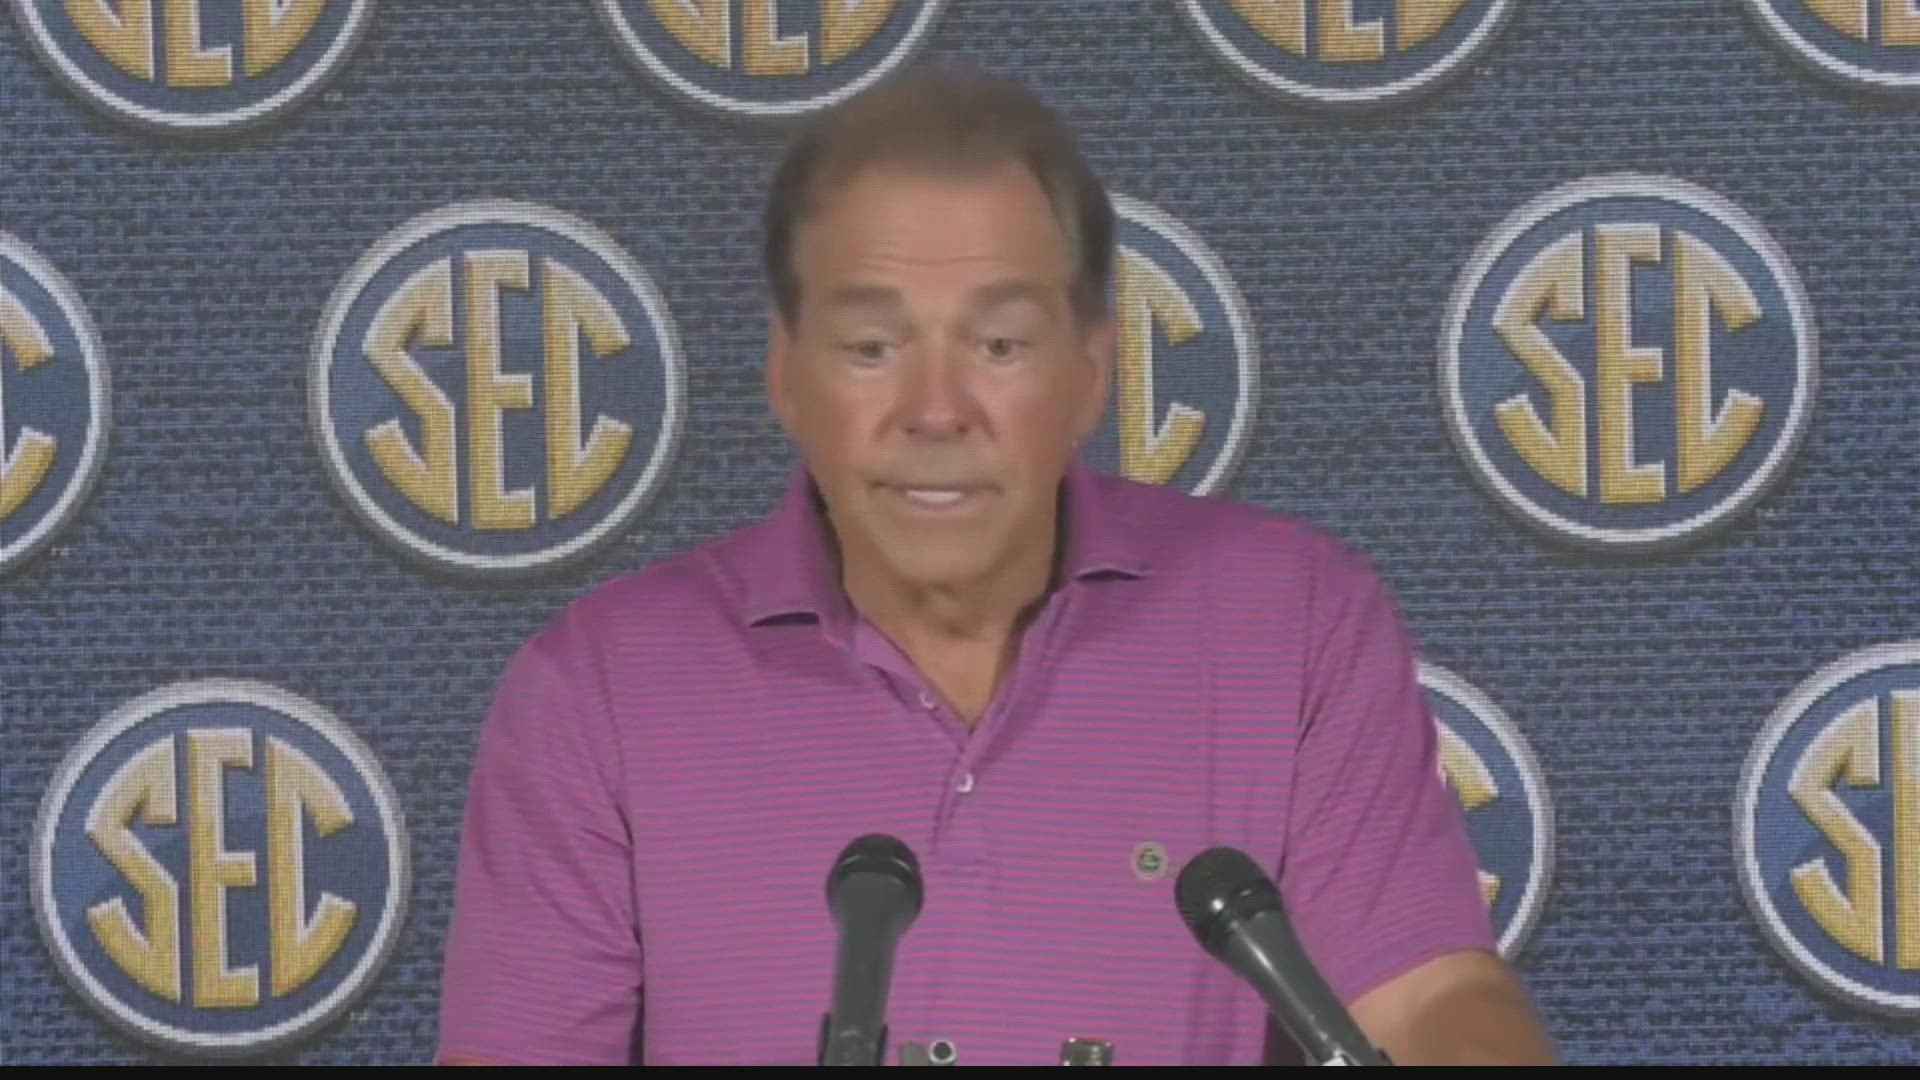 Nick Saban tried to put an end to his feud with Texas A&M’s Jimbo Fisher at the Southeastern Conference meetings.